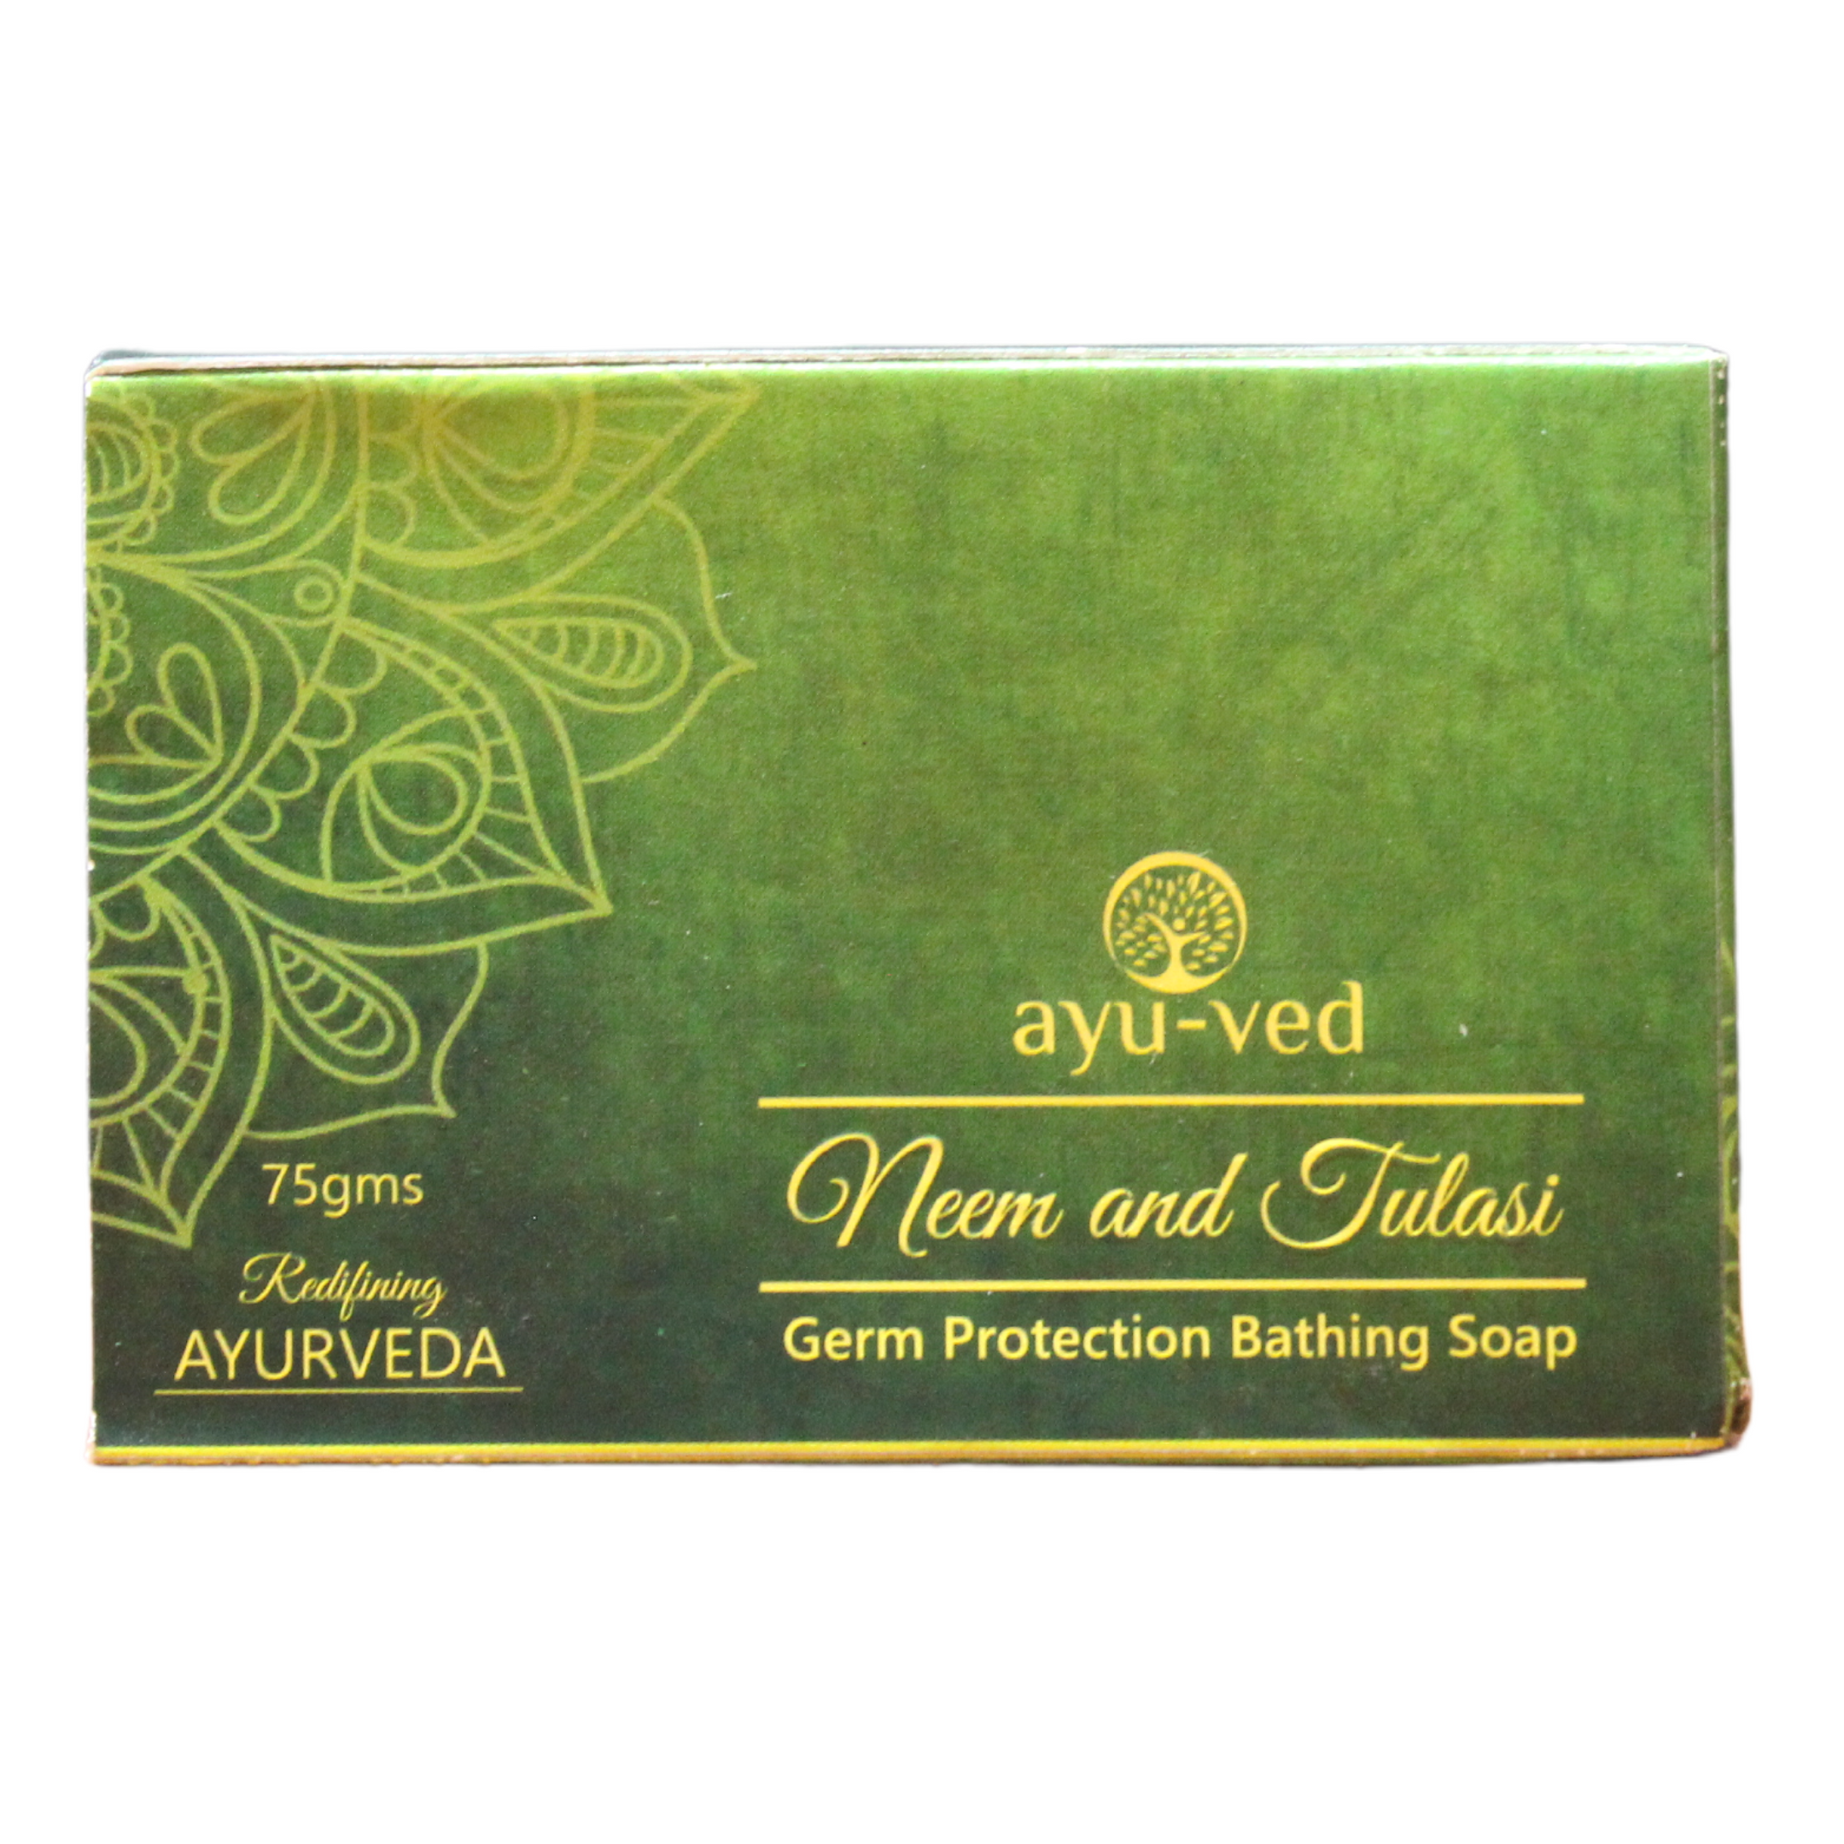 Shop Neem & Tulsi Soap 75gm at price 60.00 from Ayuved Online - Ayush Care